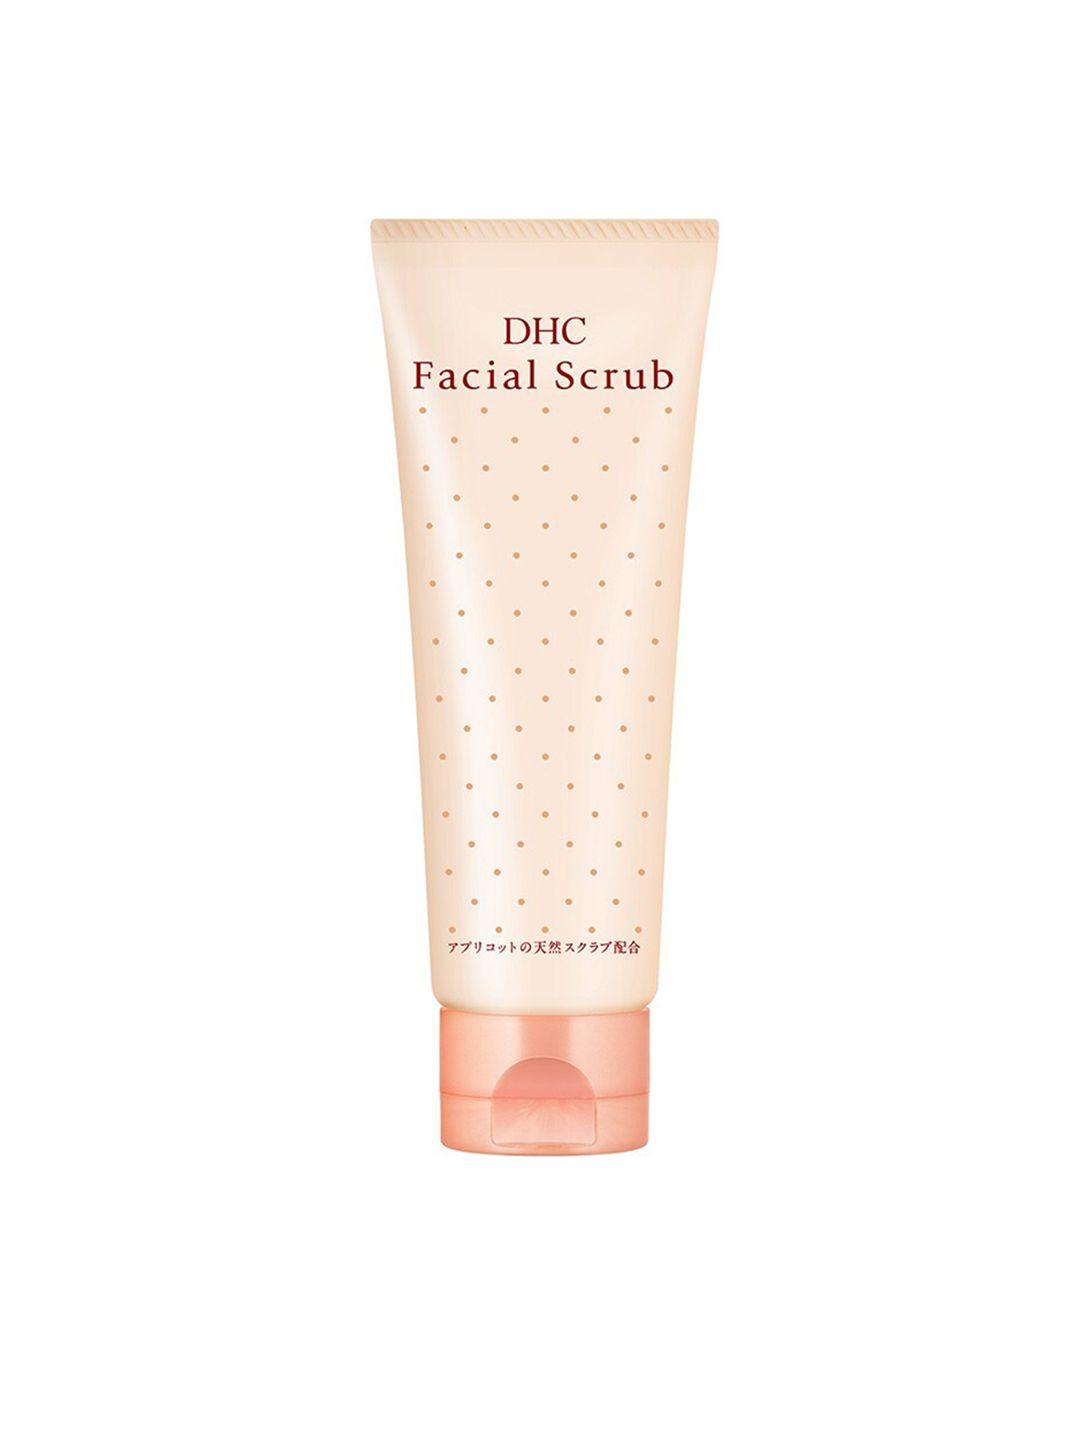 dhc-beauty-exfoliating-facial-scrub-for-smooth-&-hydrated-skin---100g